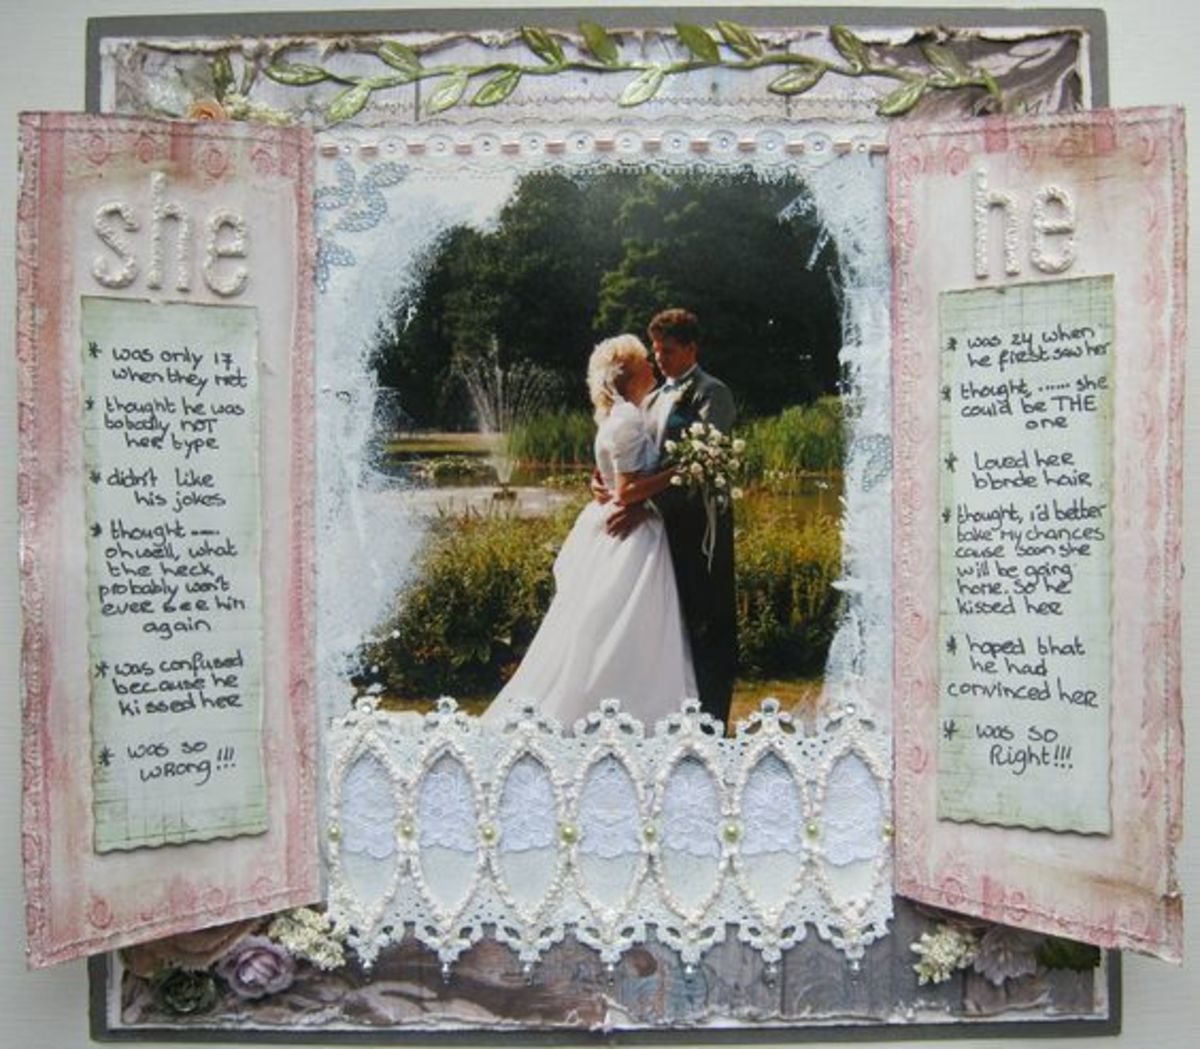 Weddings are the happiest of places to create scrapbooks.